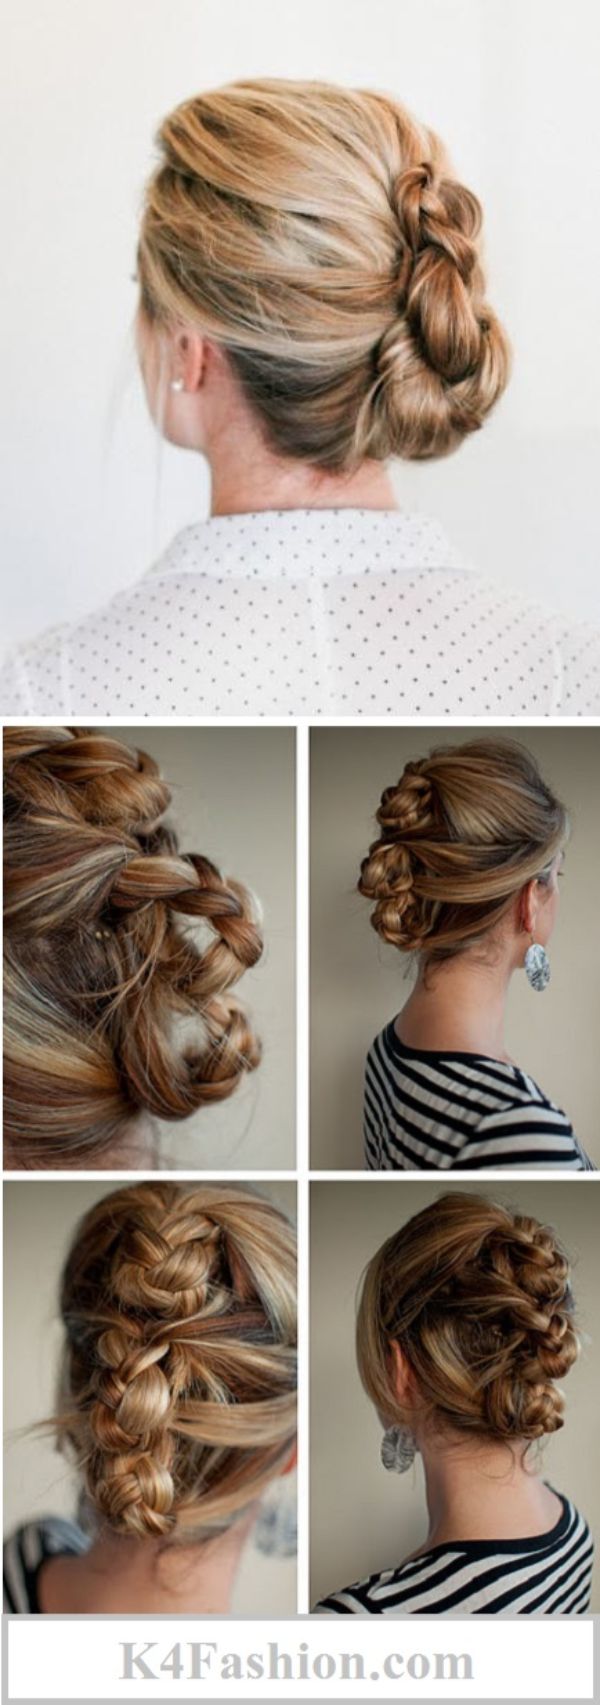 Office Hairstyles: Use Your Own Braids Simple Hairstyles For A Strict Dress Code